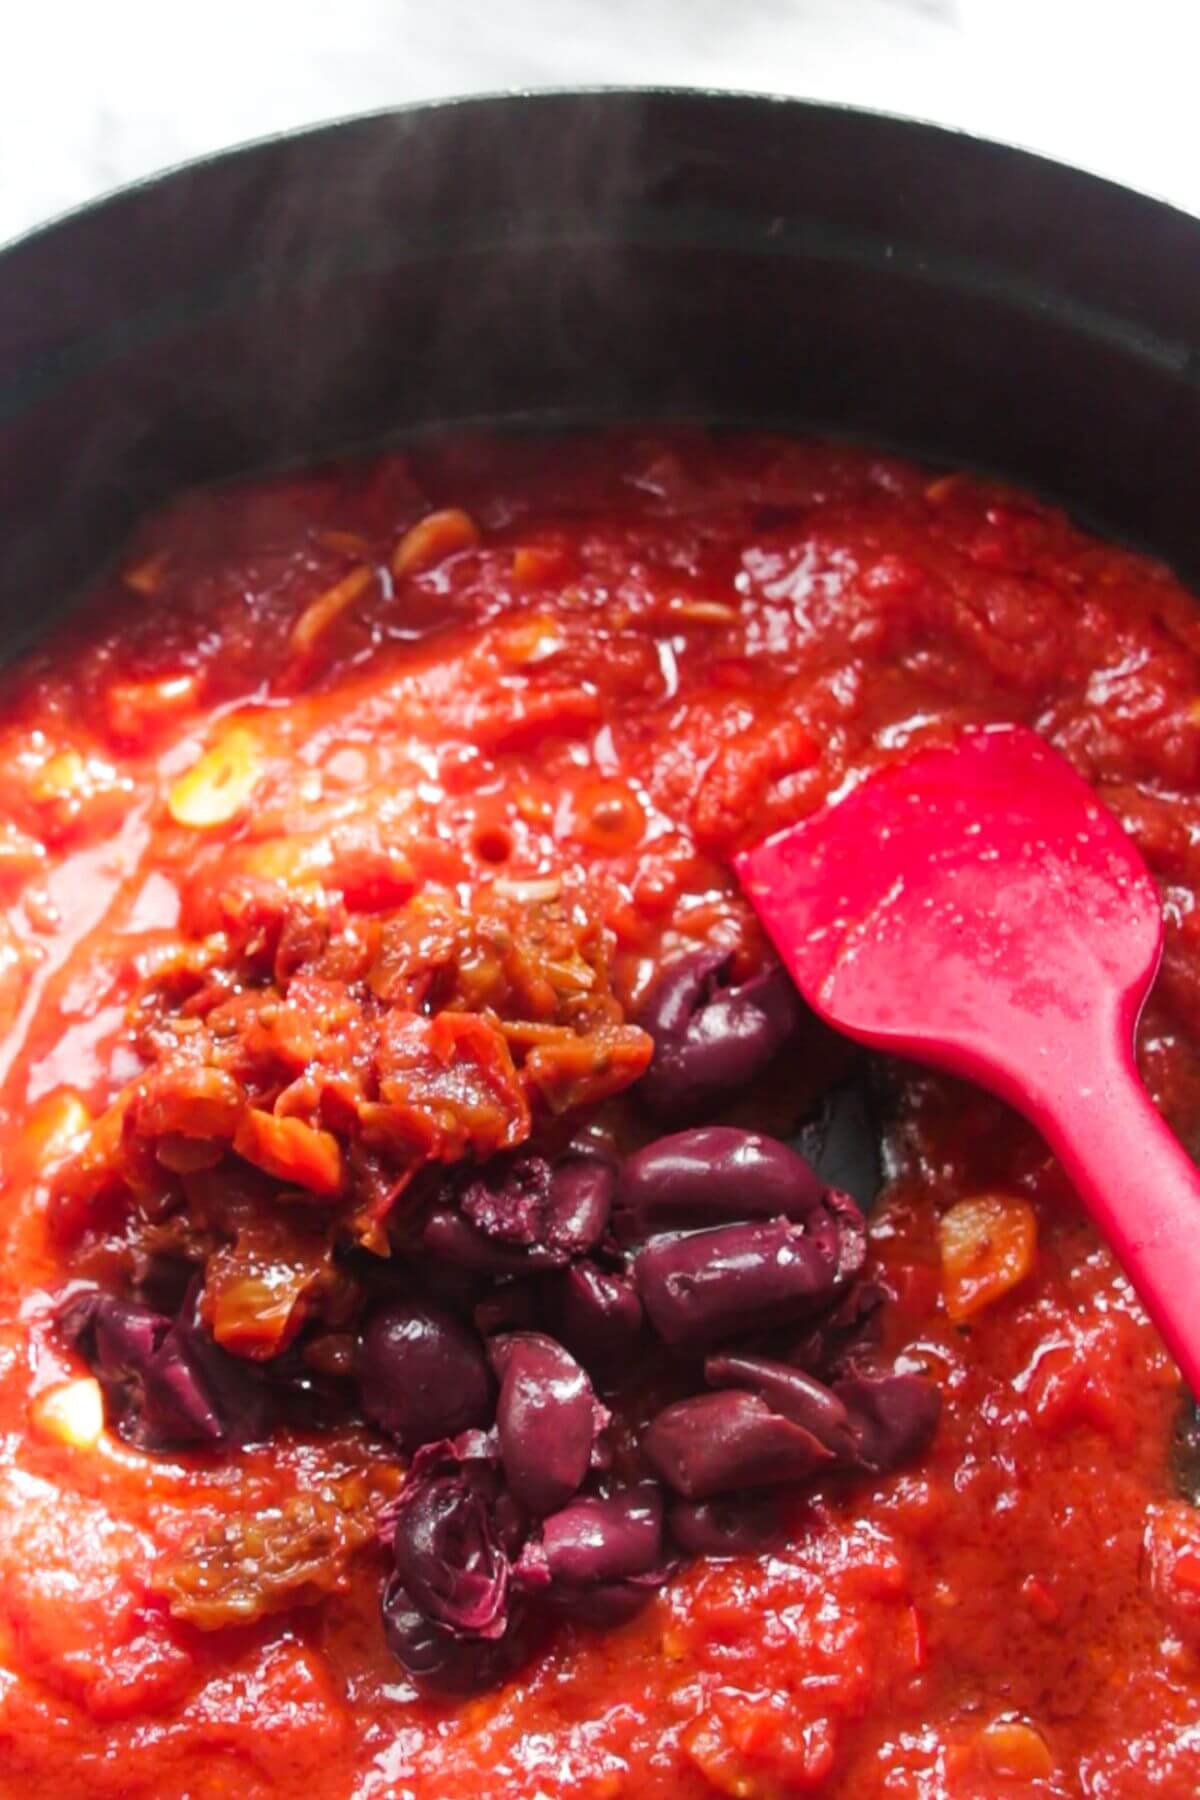 Kalamata olives and sundried tomatoes in a tomato sauce in a large black skillet.